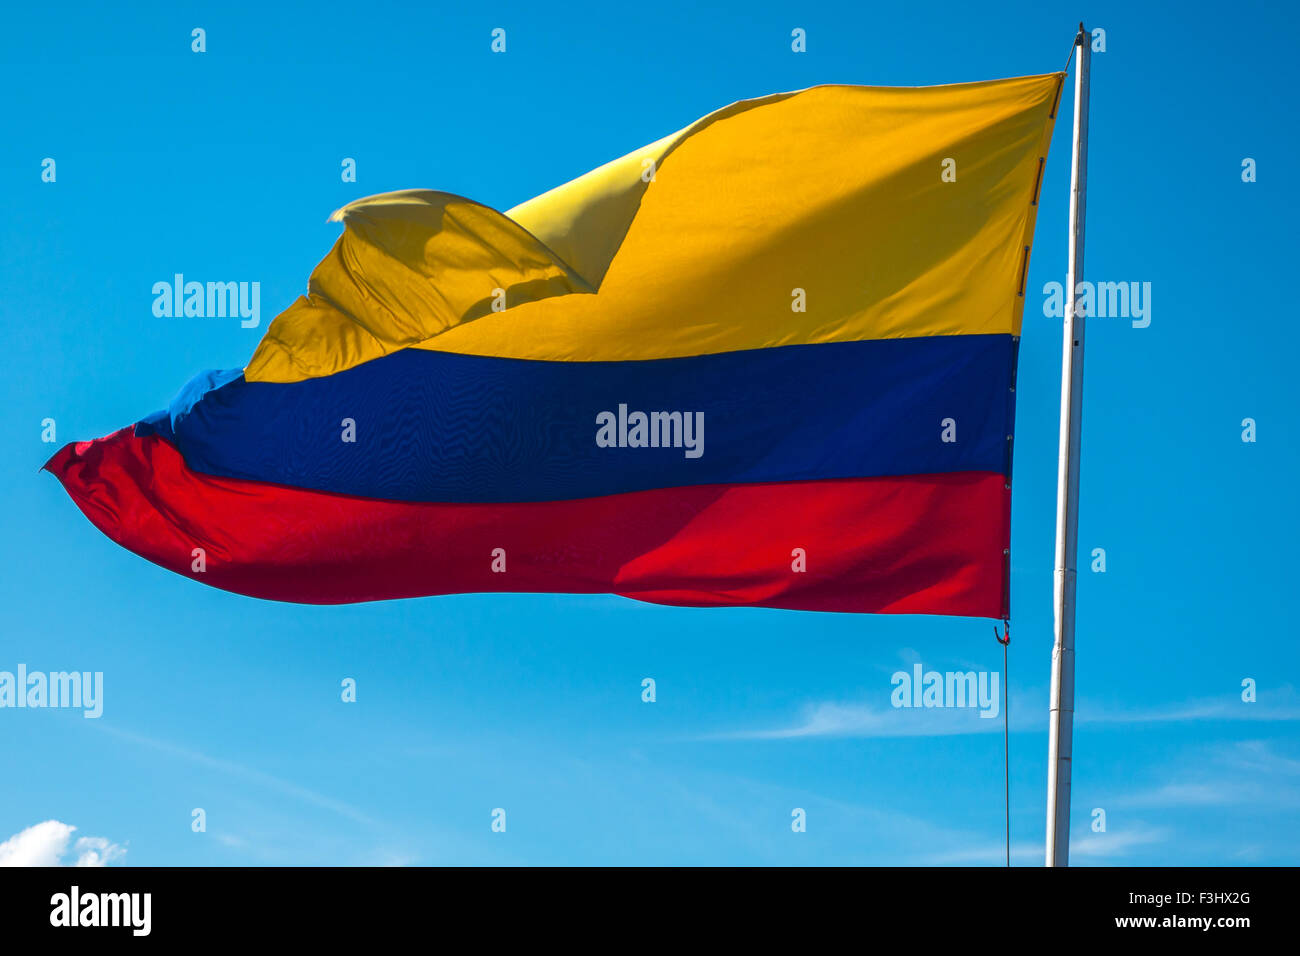 Colombia flag on a pole Stock Photo